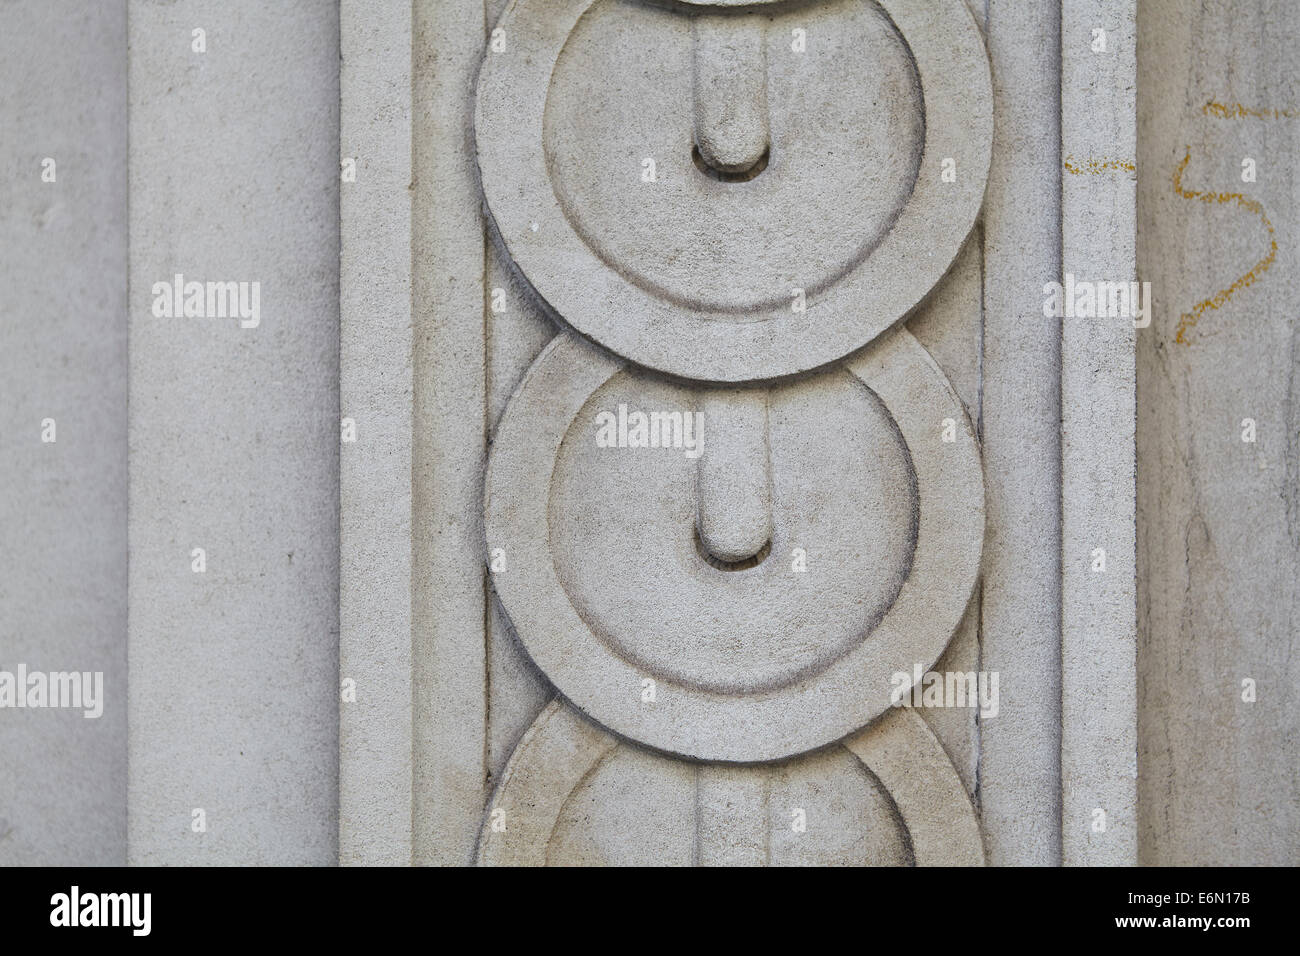 London textures, typical grey stone, patterned. Stock Photo